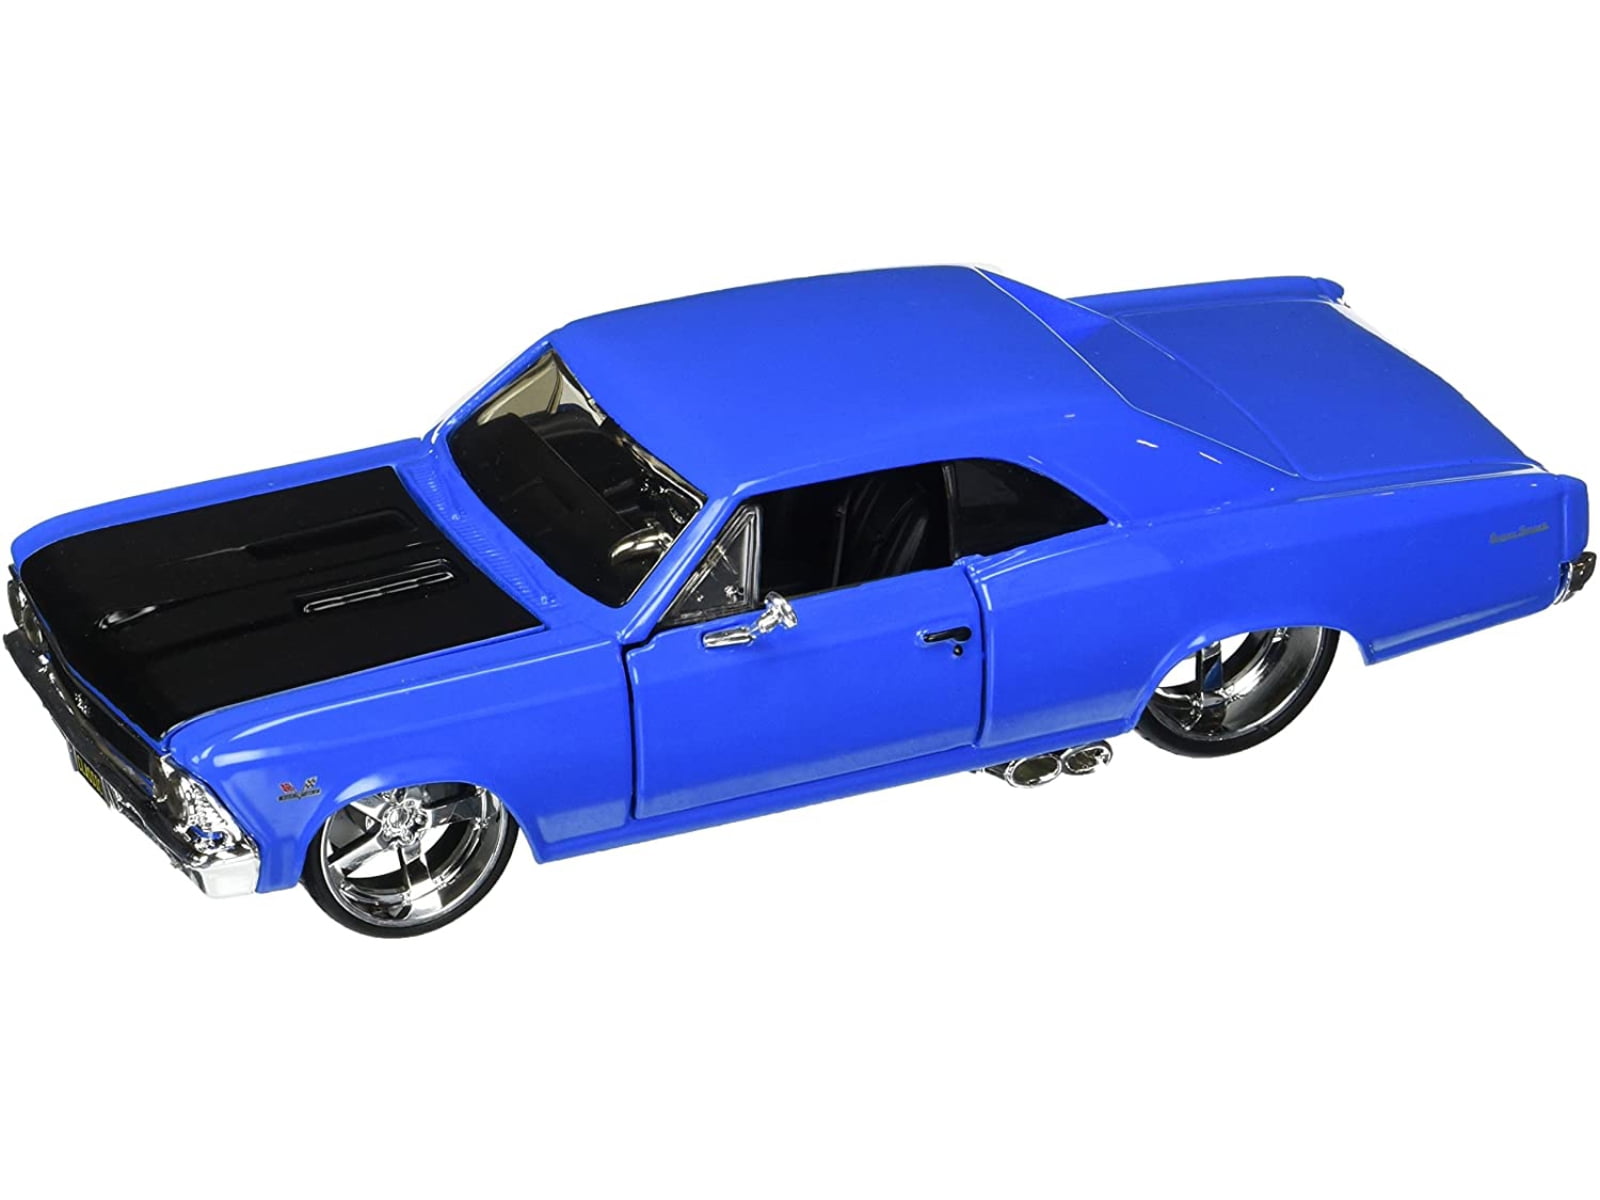 MAISTO CLASSIC Muscle 1966 Chevrolet Chevelle SS 396 Blue scale 1:24 